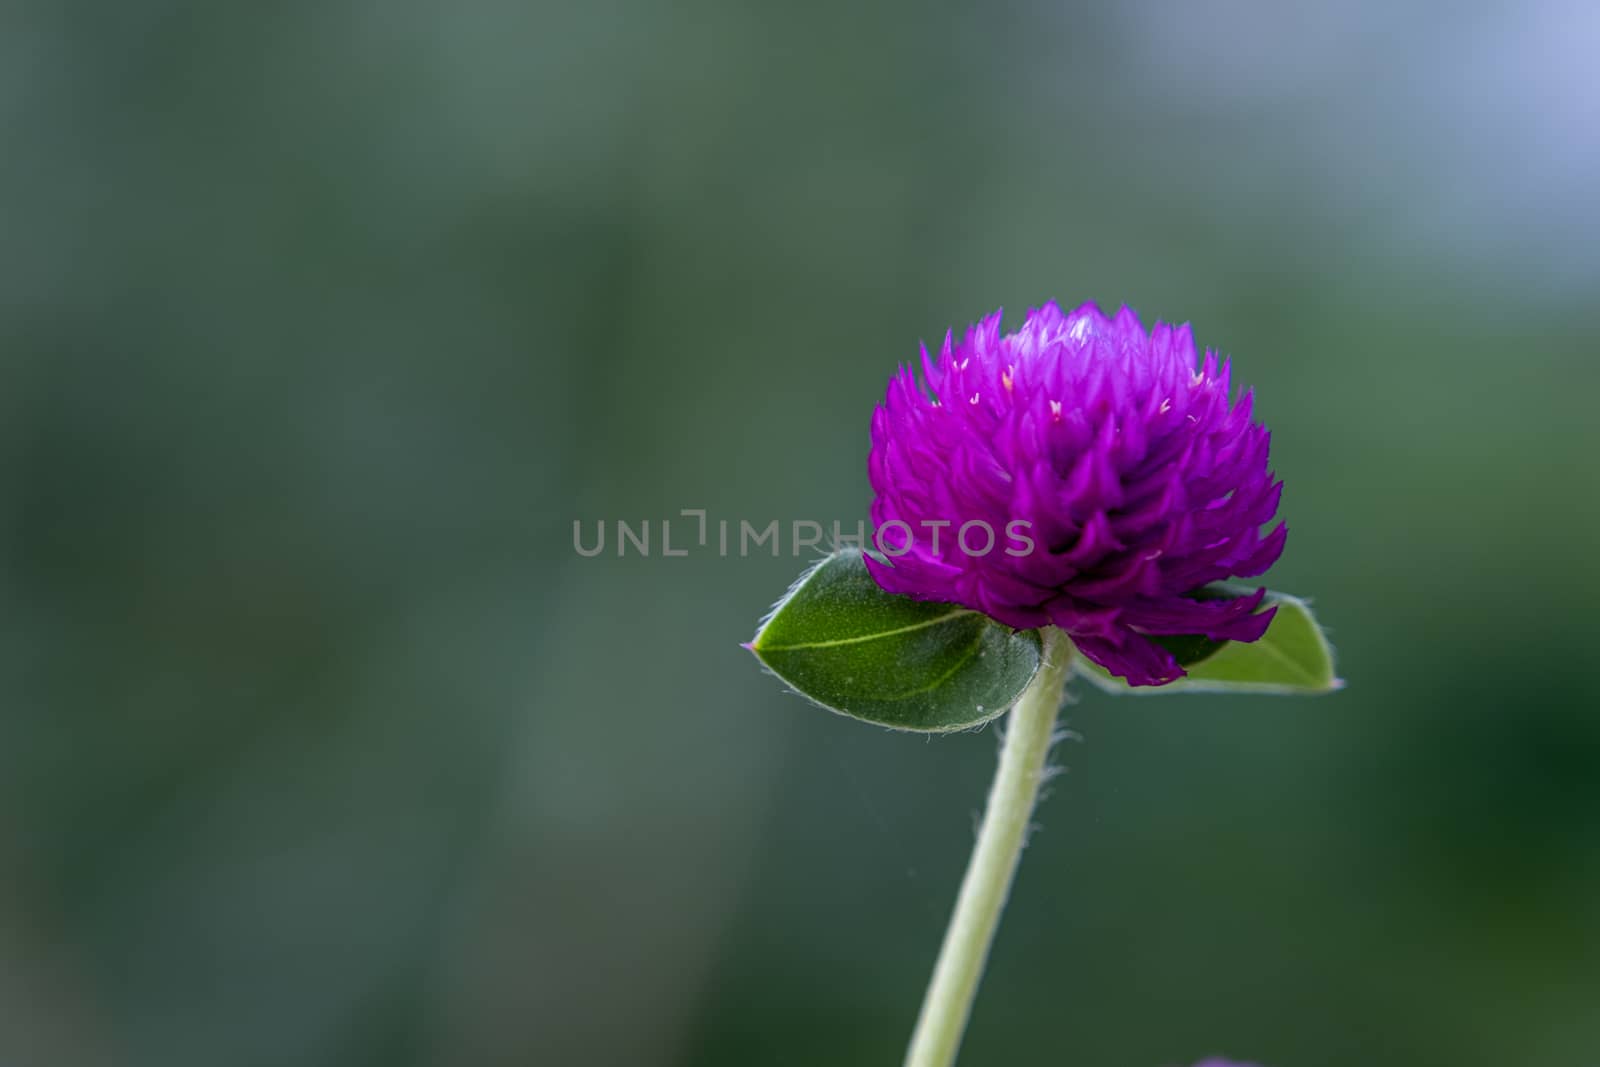 Globe Amaranth / Bachelor Button. Flowers are magenta, white, pink and light purple. Popular plant as a home decoration.